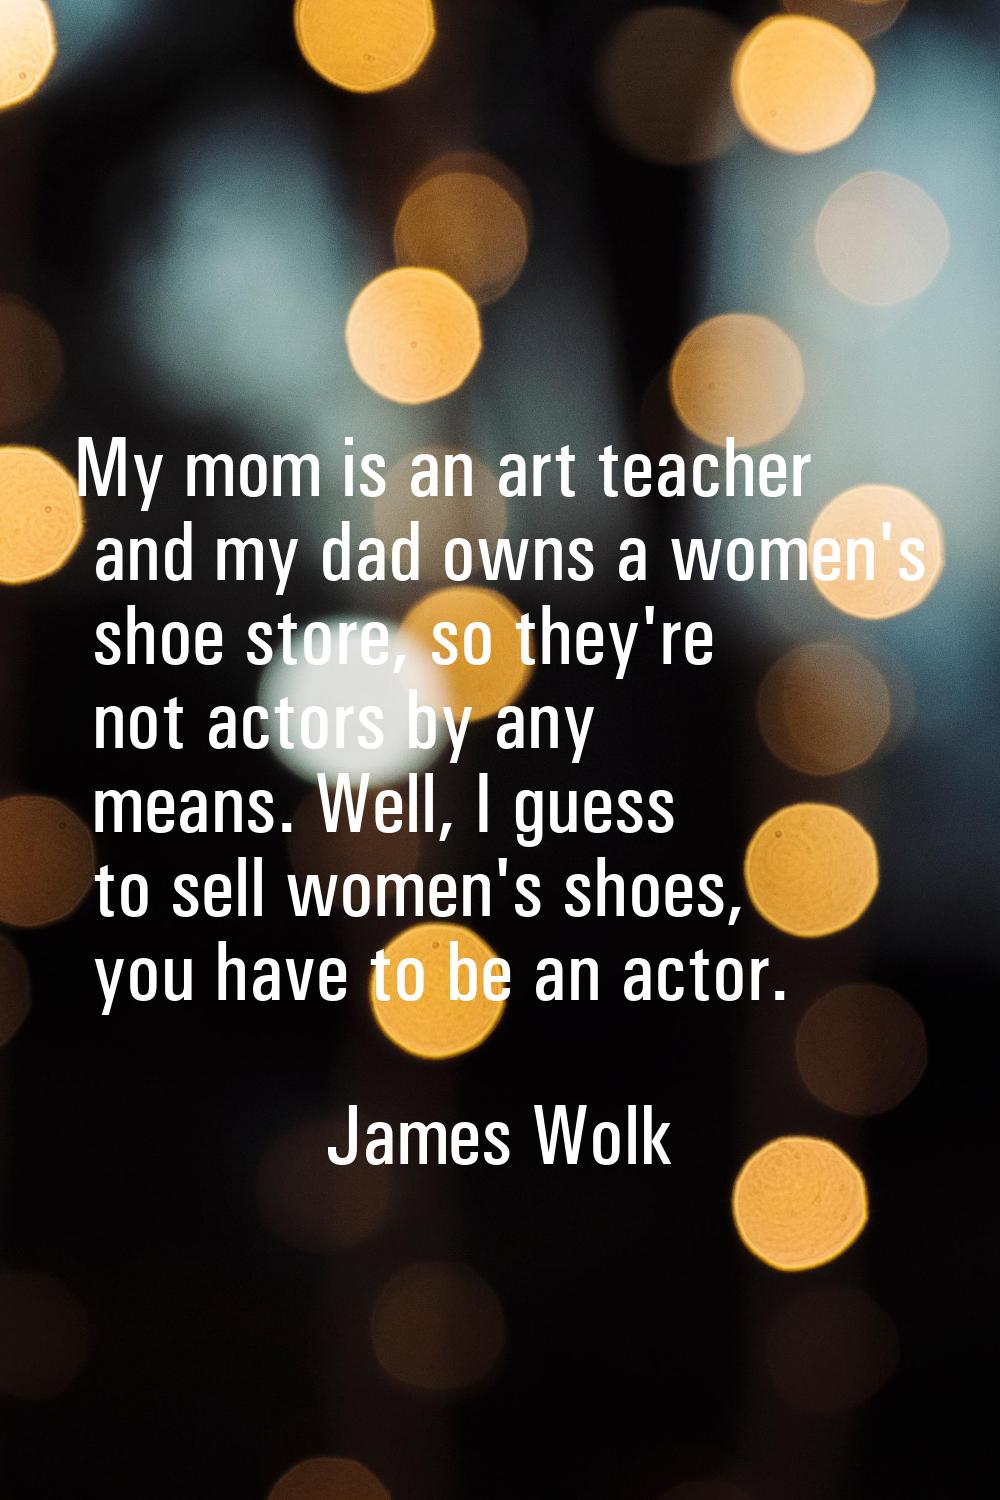 My mom is an art teacher and my dad owns a women's shoe store, so they're not actors by any means. 